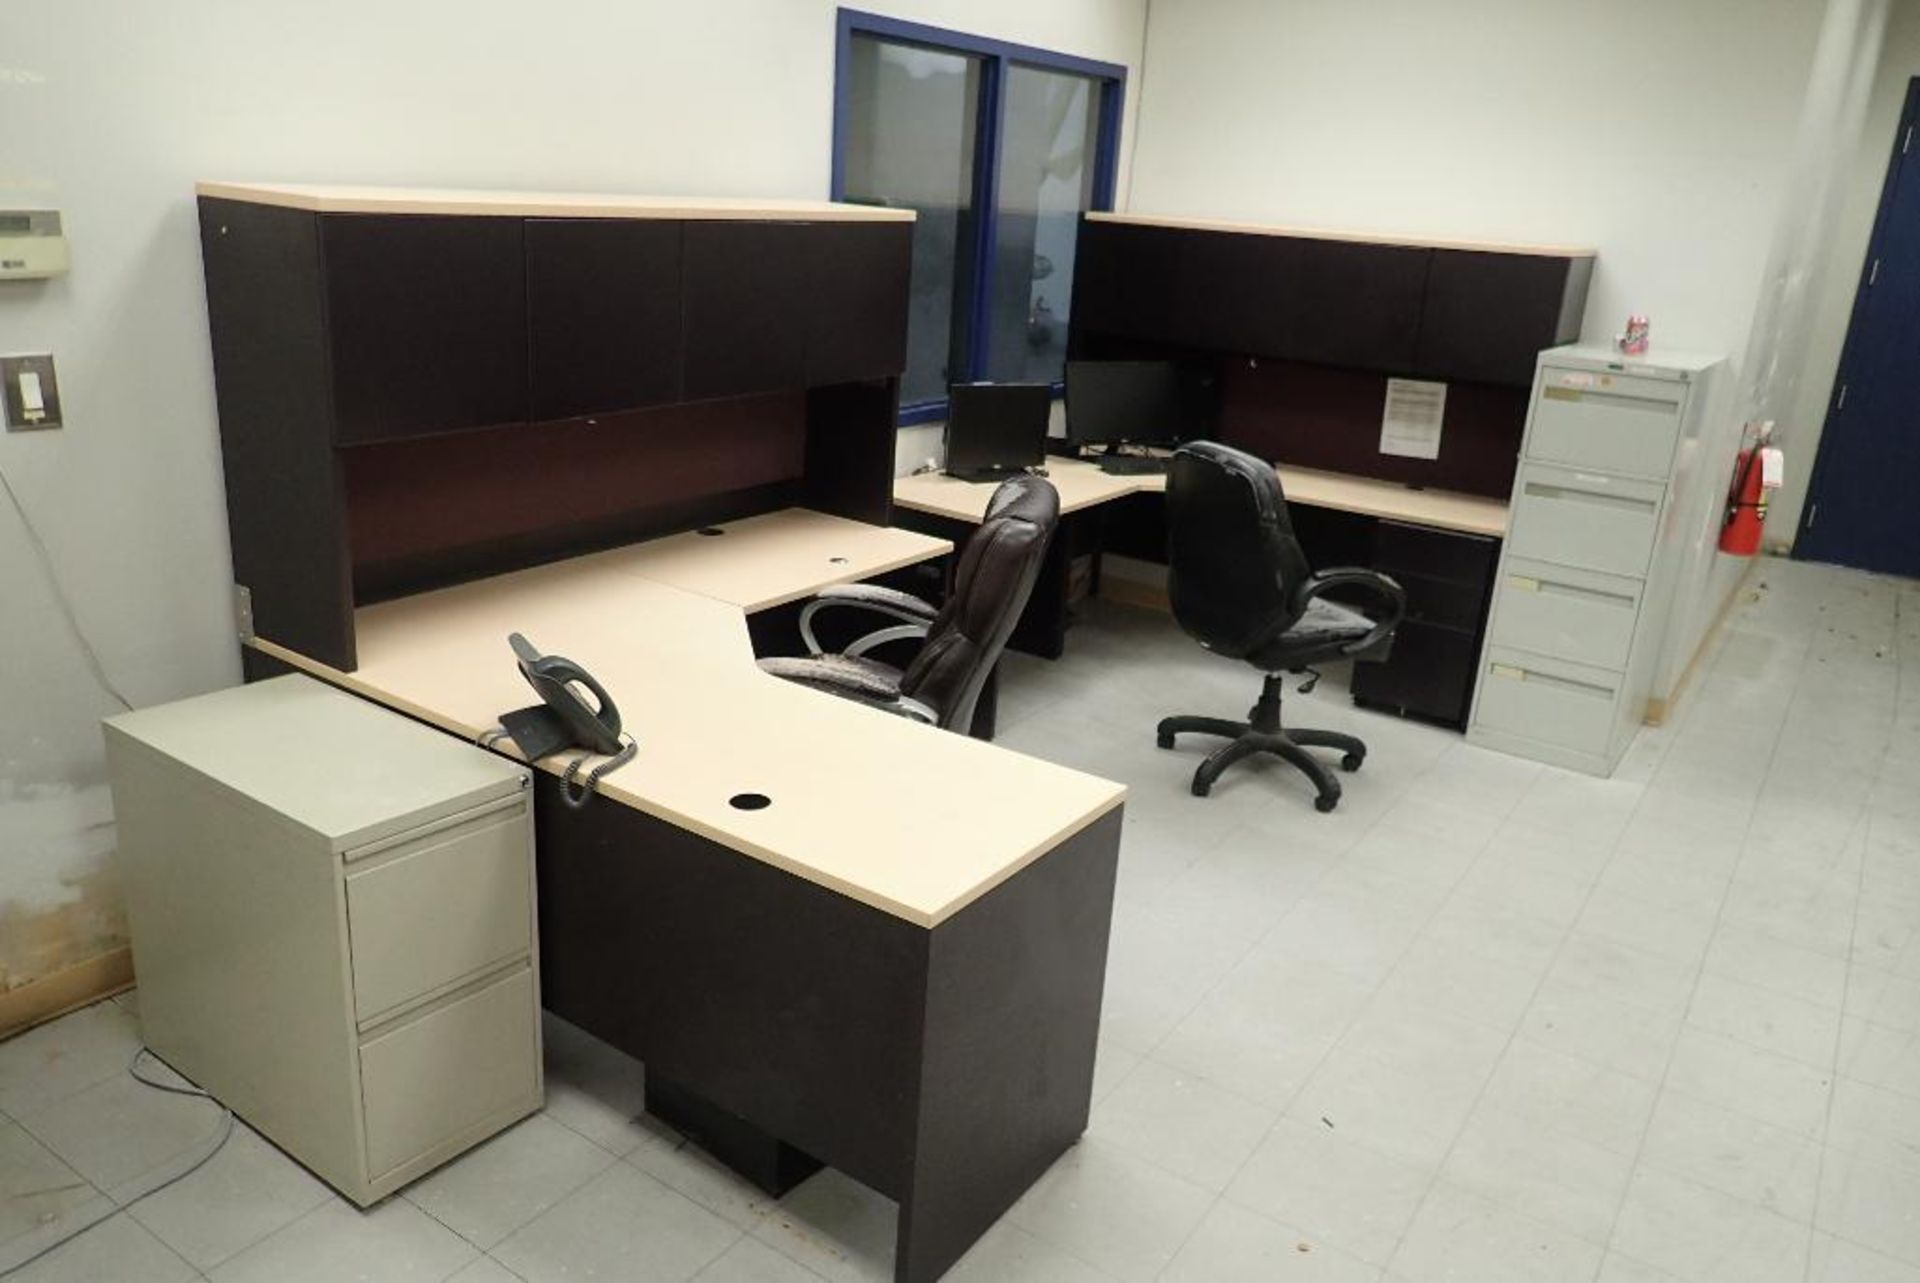 Contents of production office, desks, chairs, filing cabinets, mini fridge, NO IT EQUIPMENT. **Riggi - Image 2 of 5